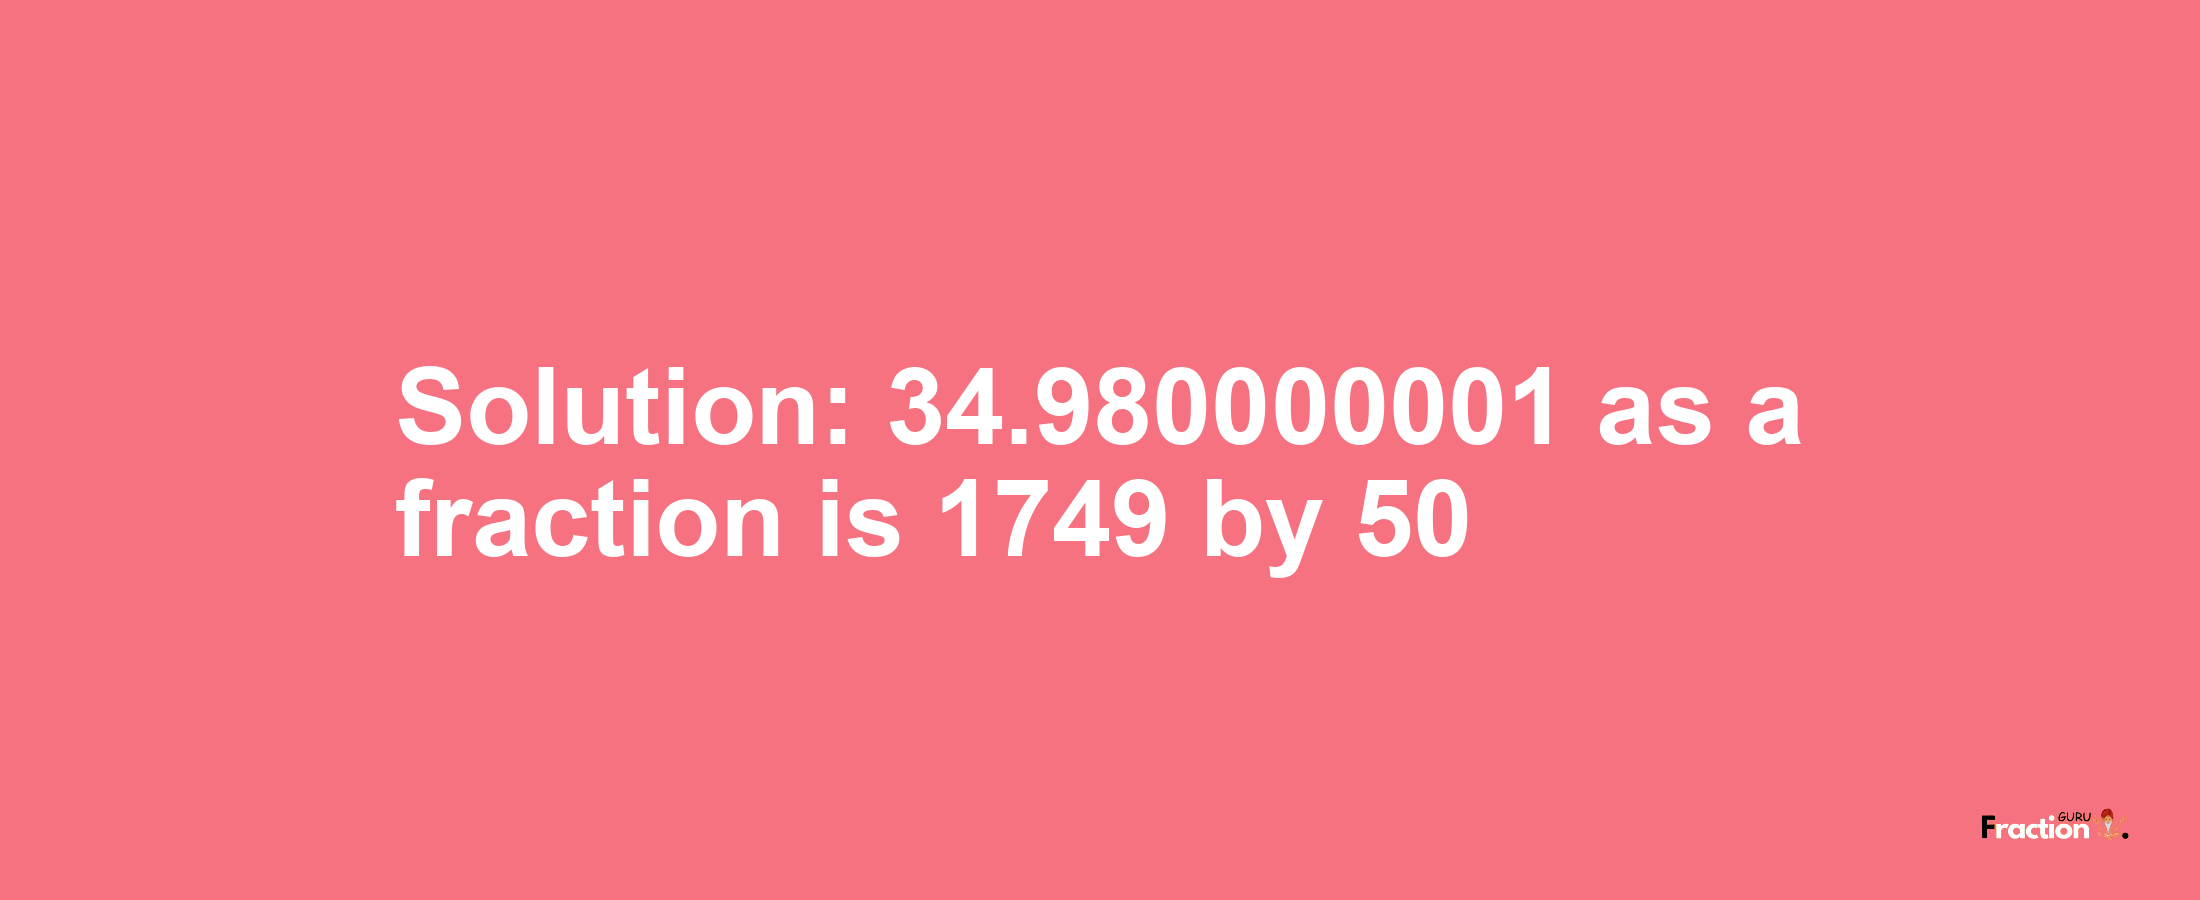 Solution:34.980000001 as a fraction is 1749/50